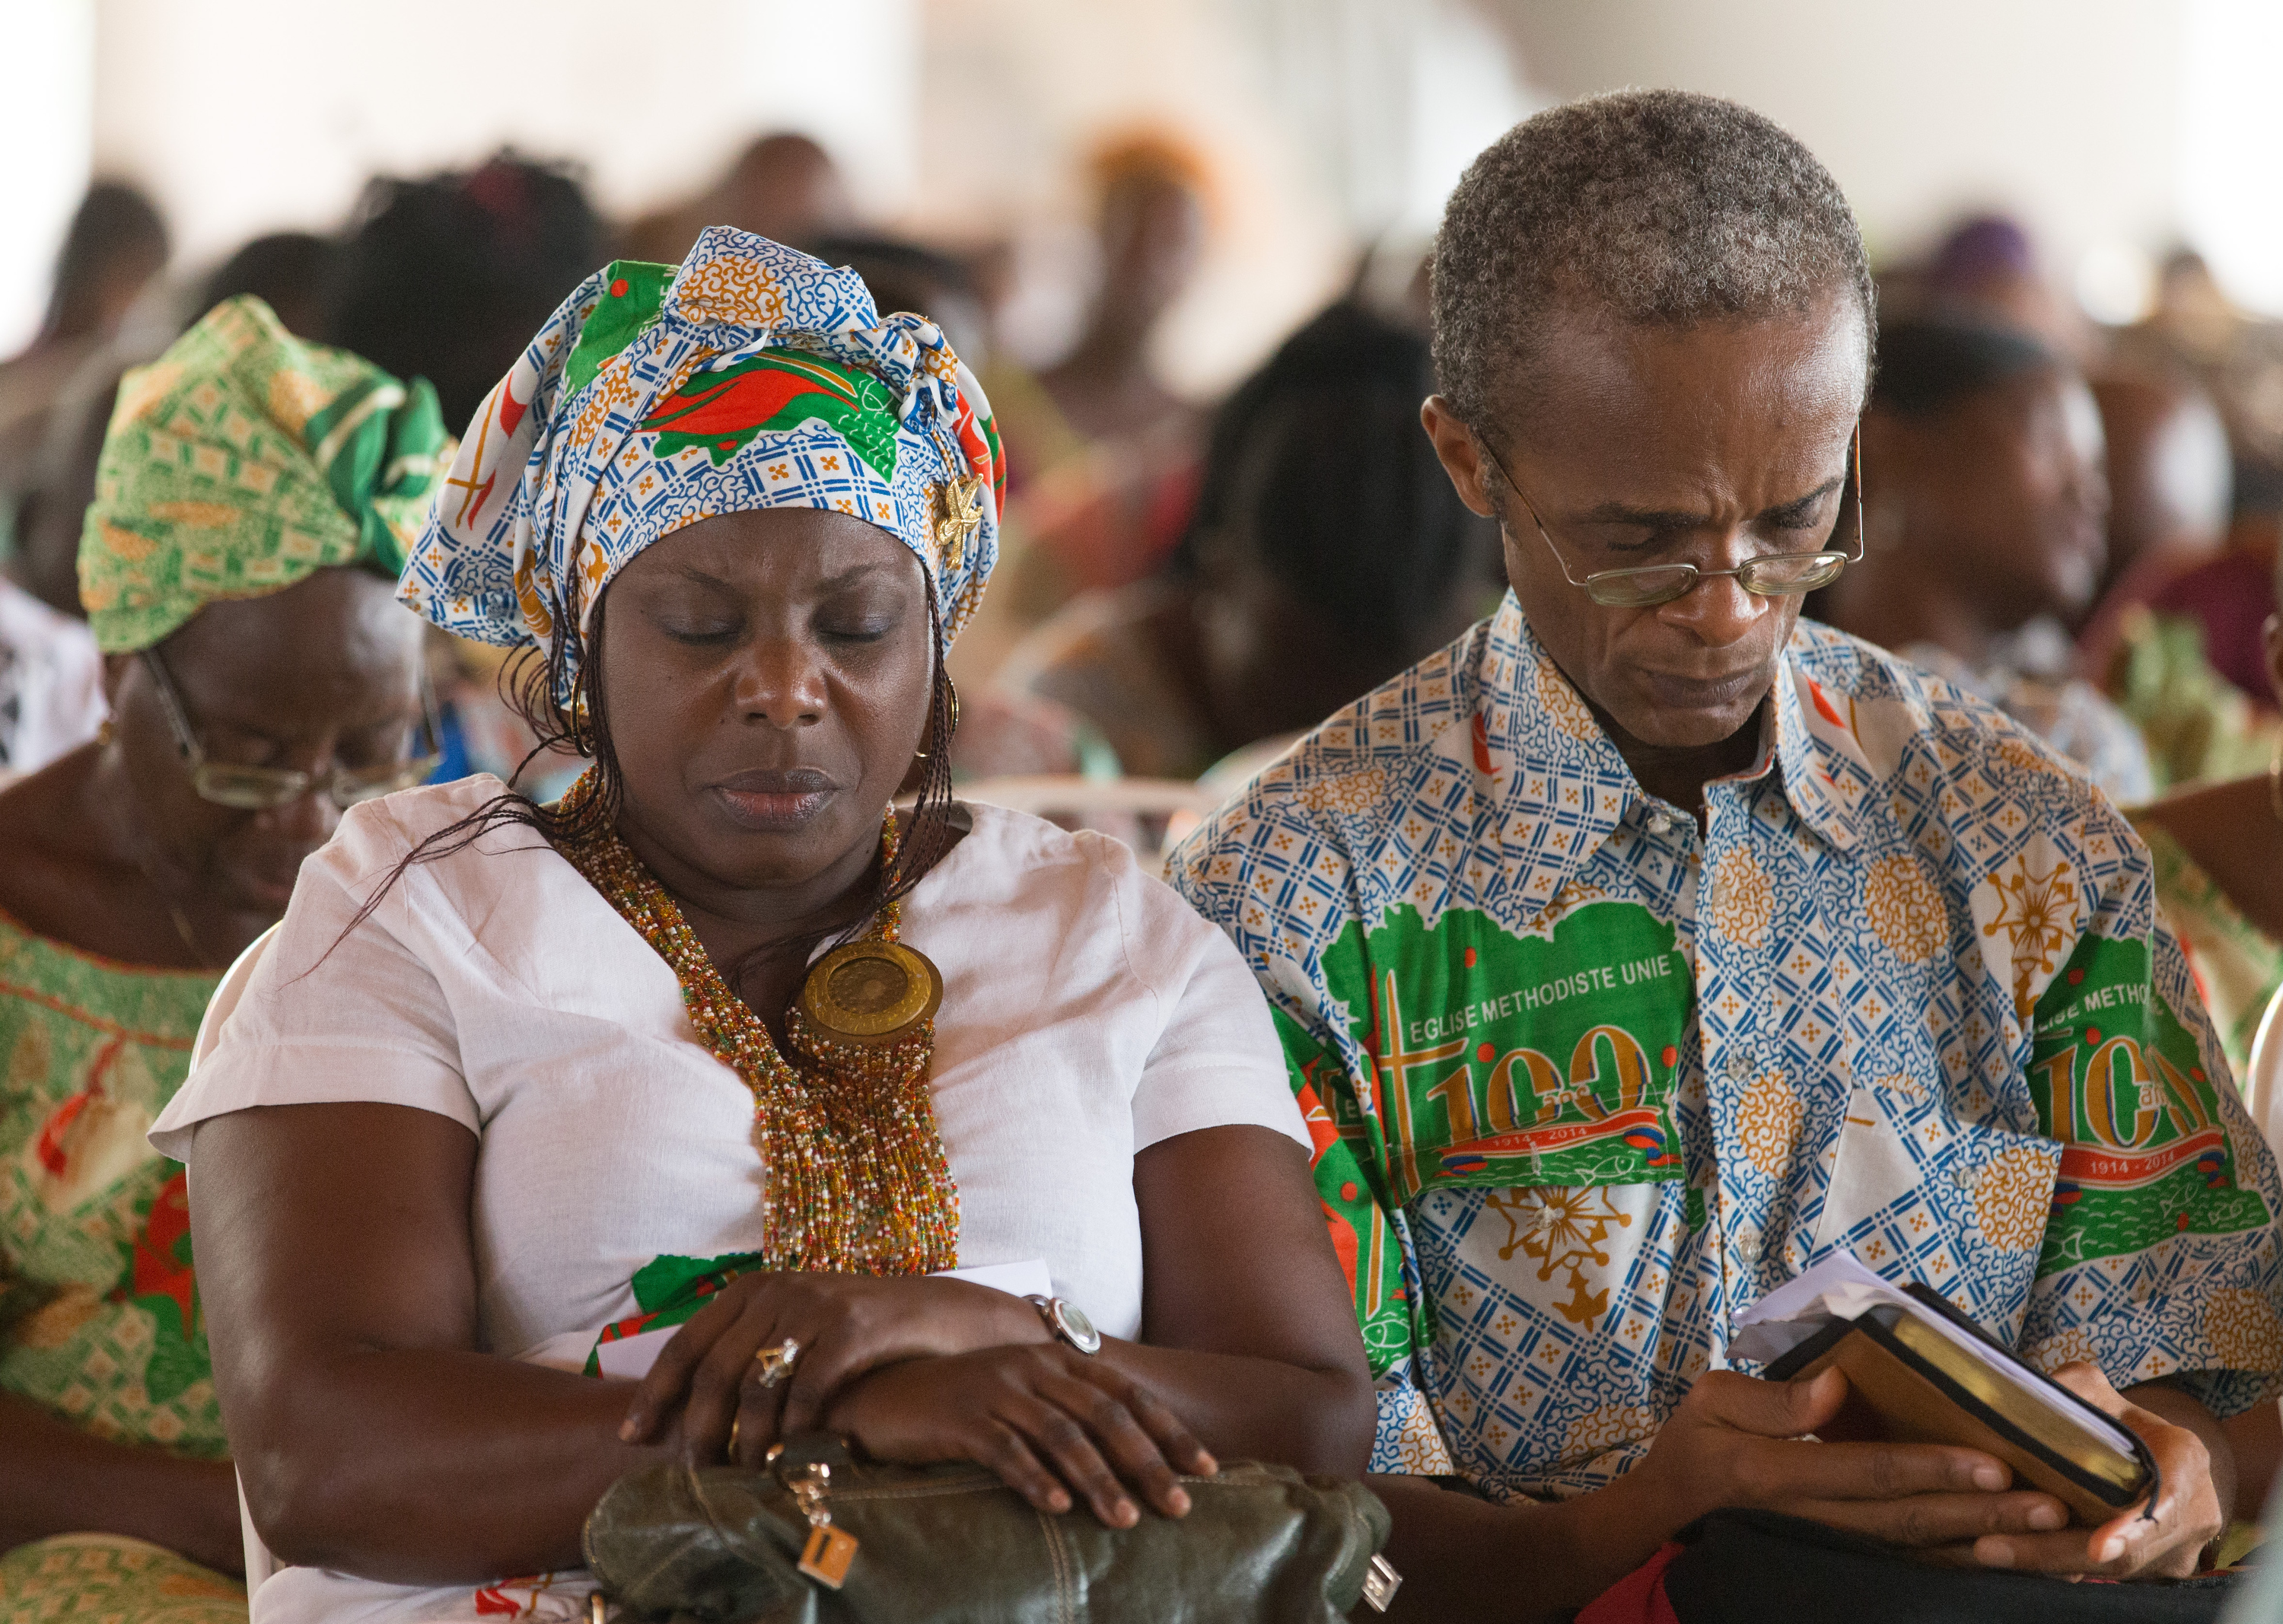 Parishioners pray during worship at Canaan United Methodist Church in Abidjan, Côte d'Ivoire, in February 2018. Photo by Mike DuBose, UMNS.